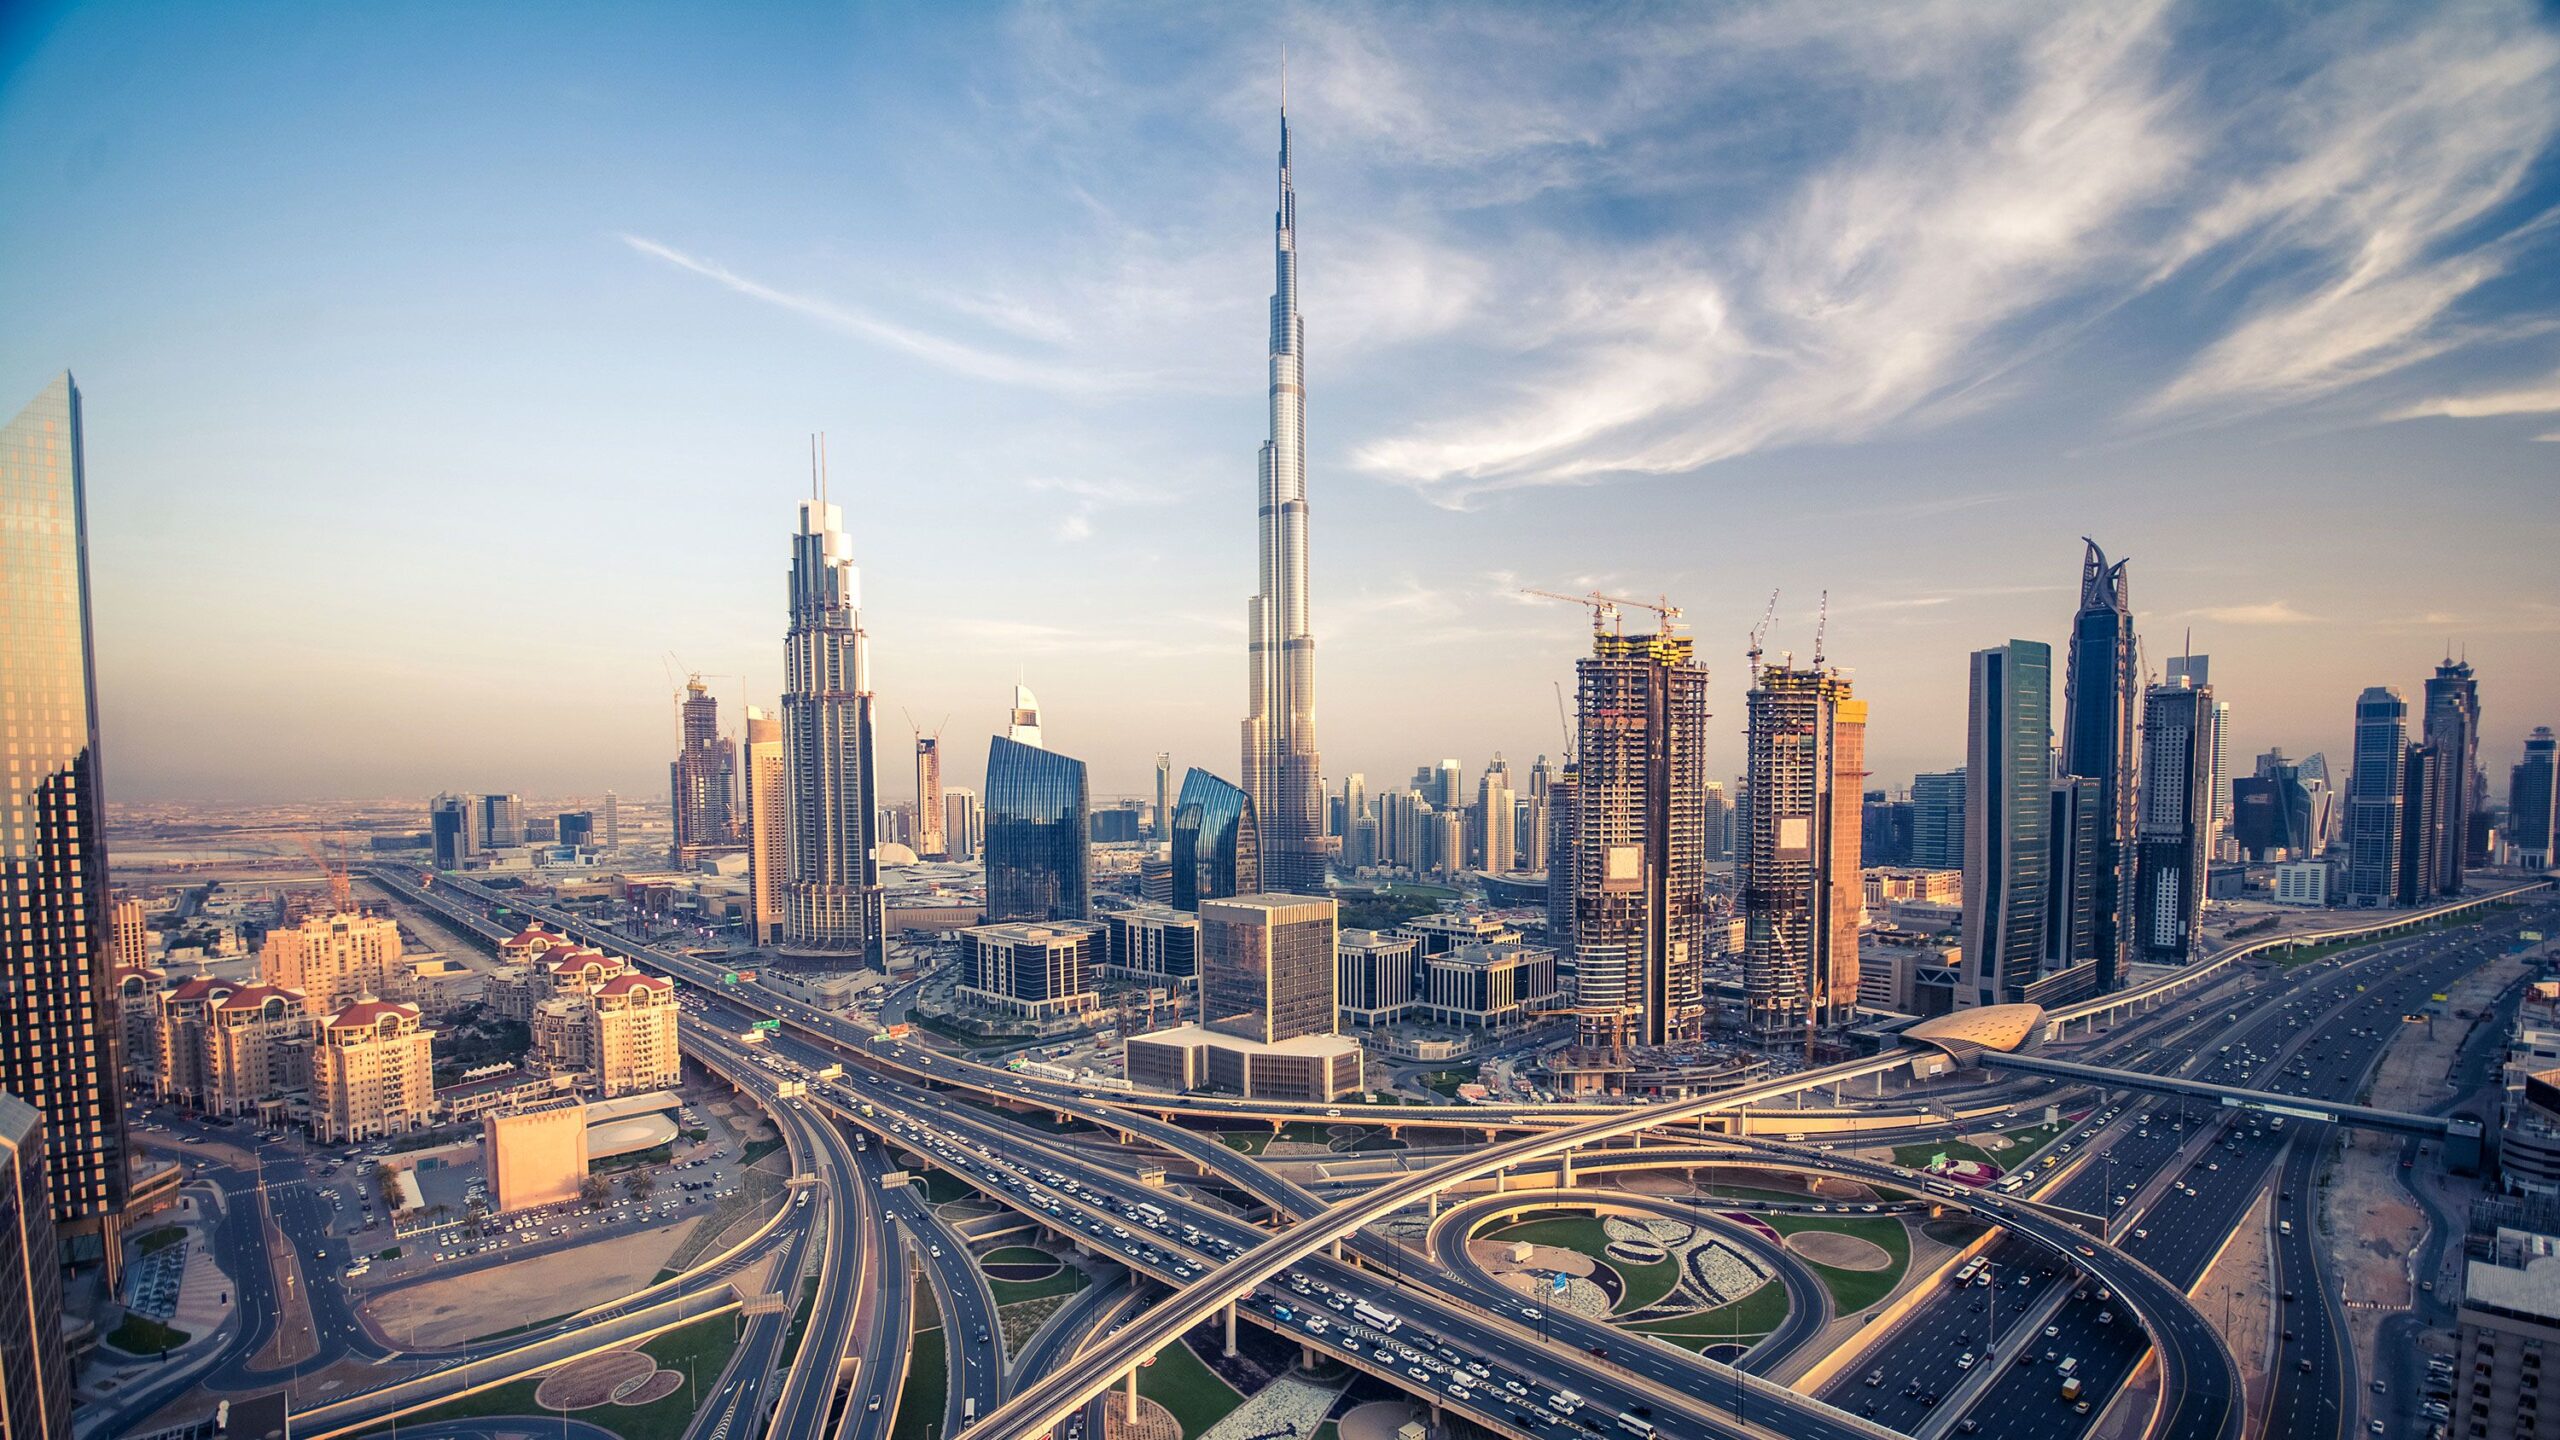 What is Dubai famous for business?